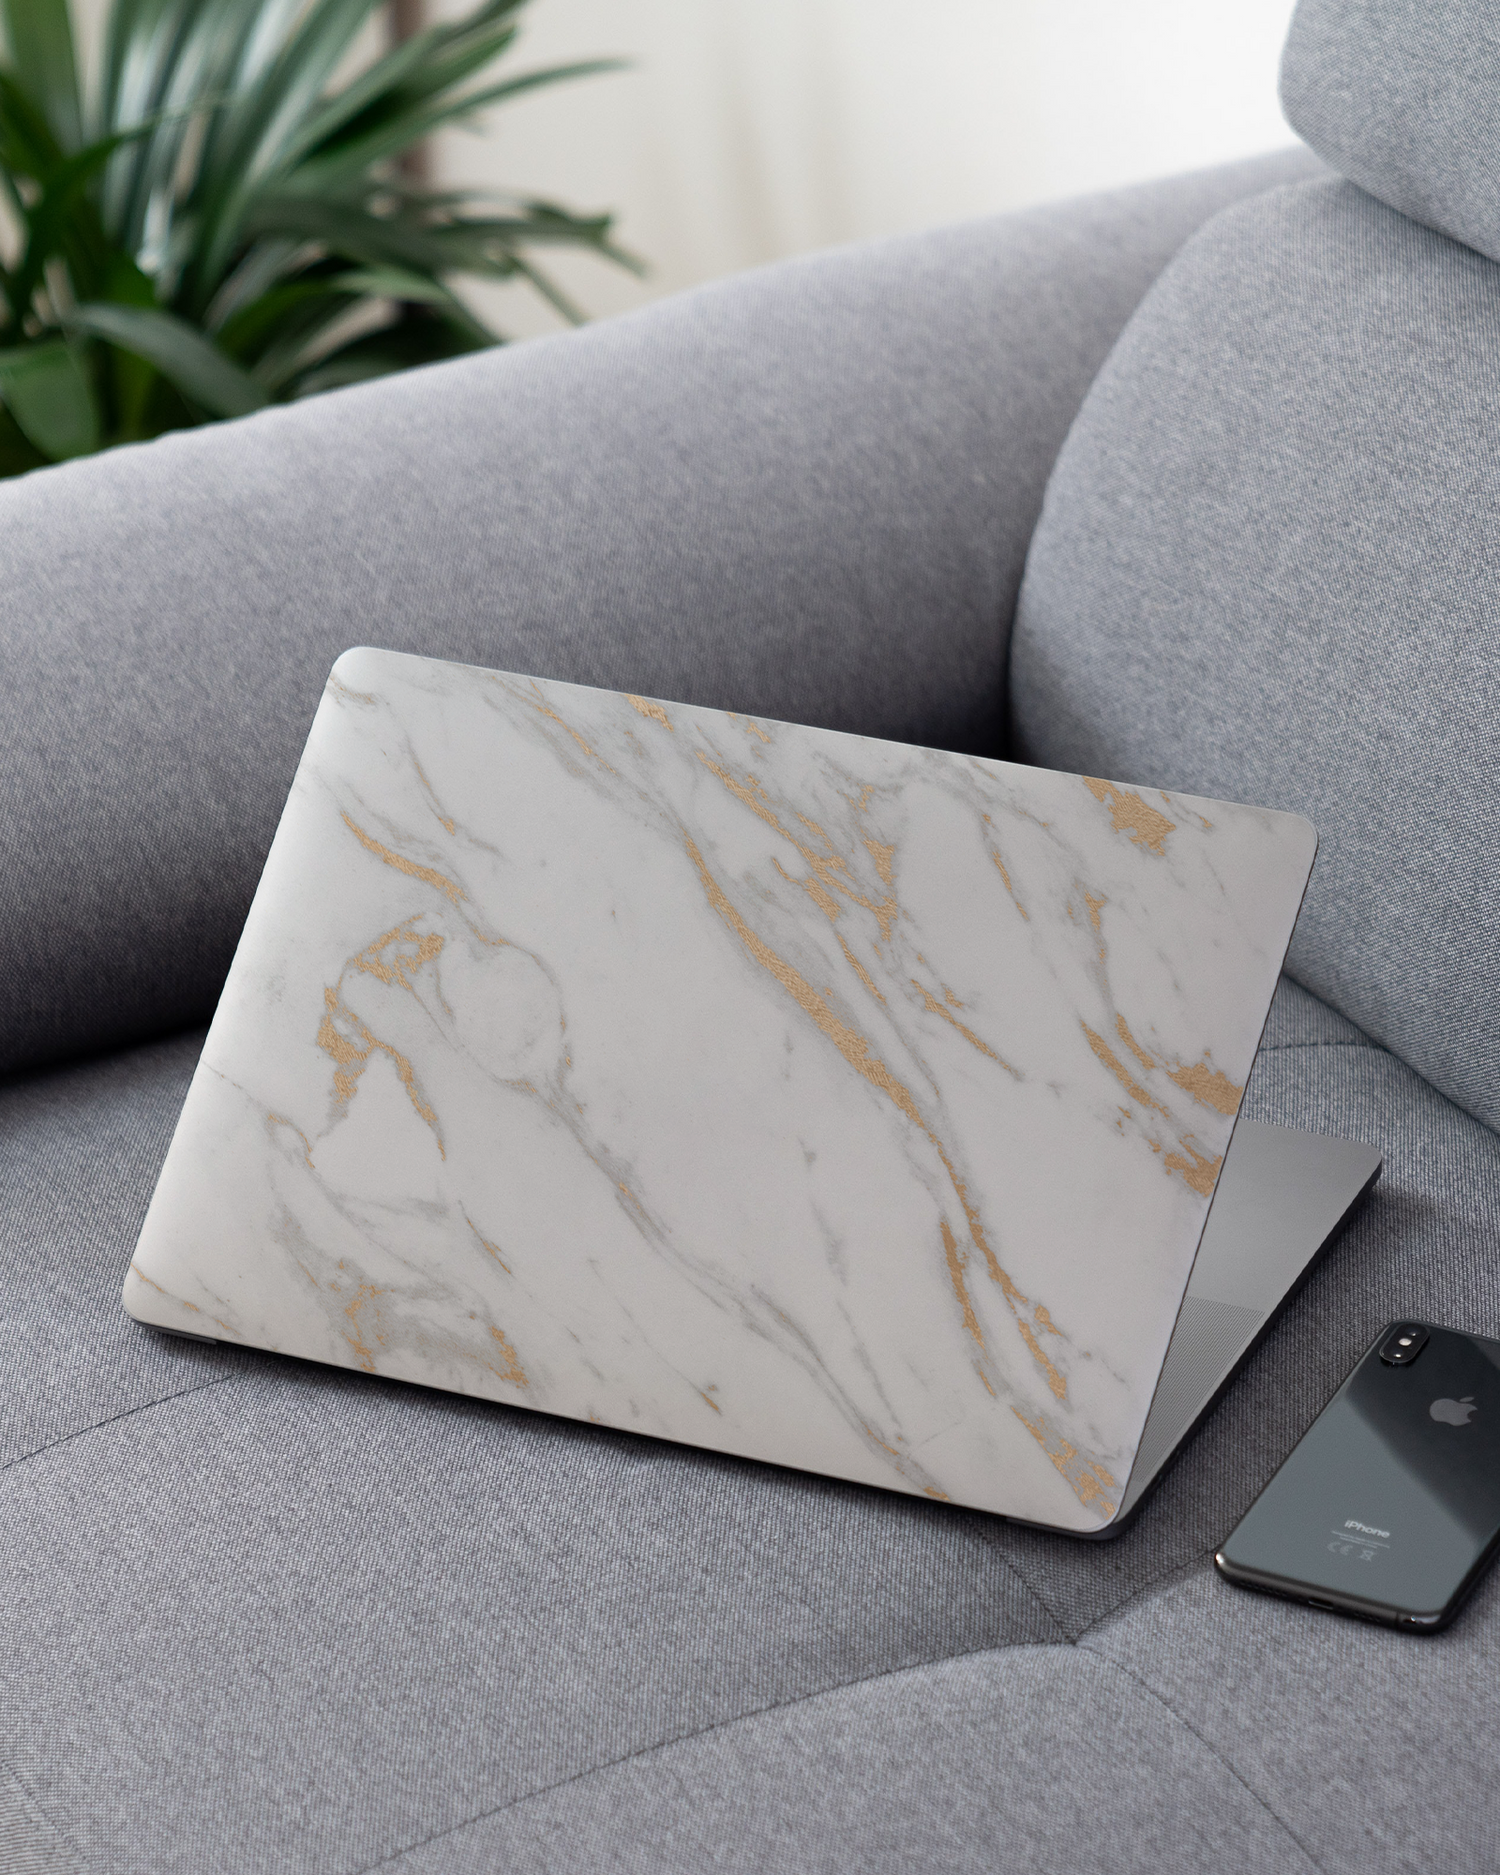 Gold Marble Elegance Laptop Skin for 13 inch Apple MacBooks on a couch